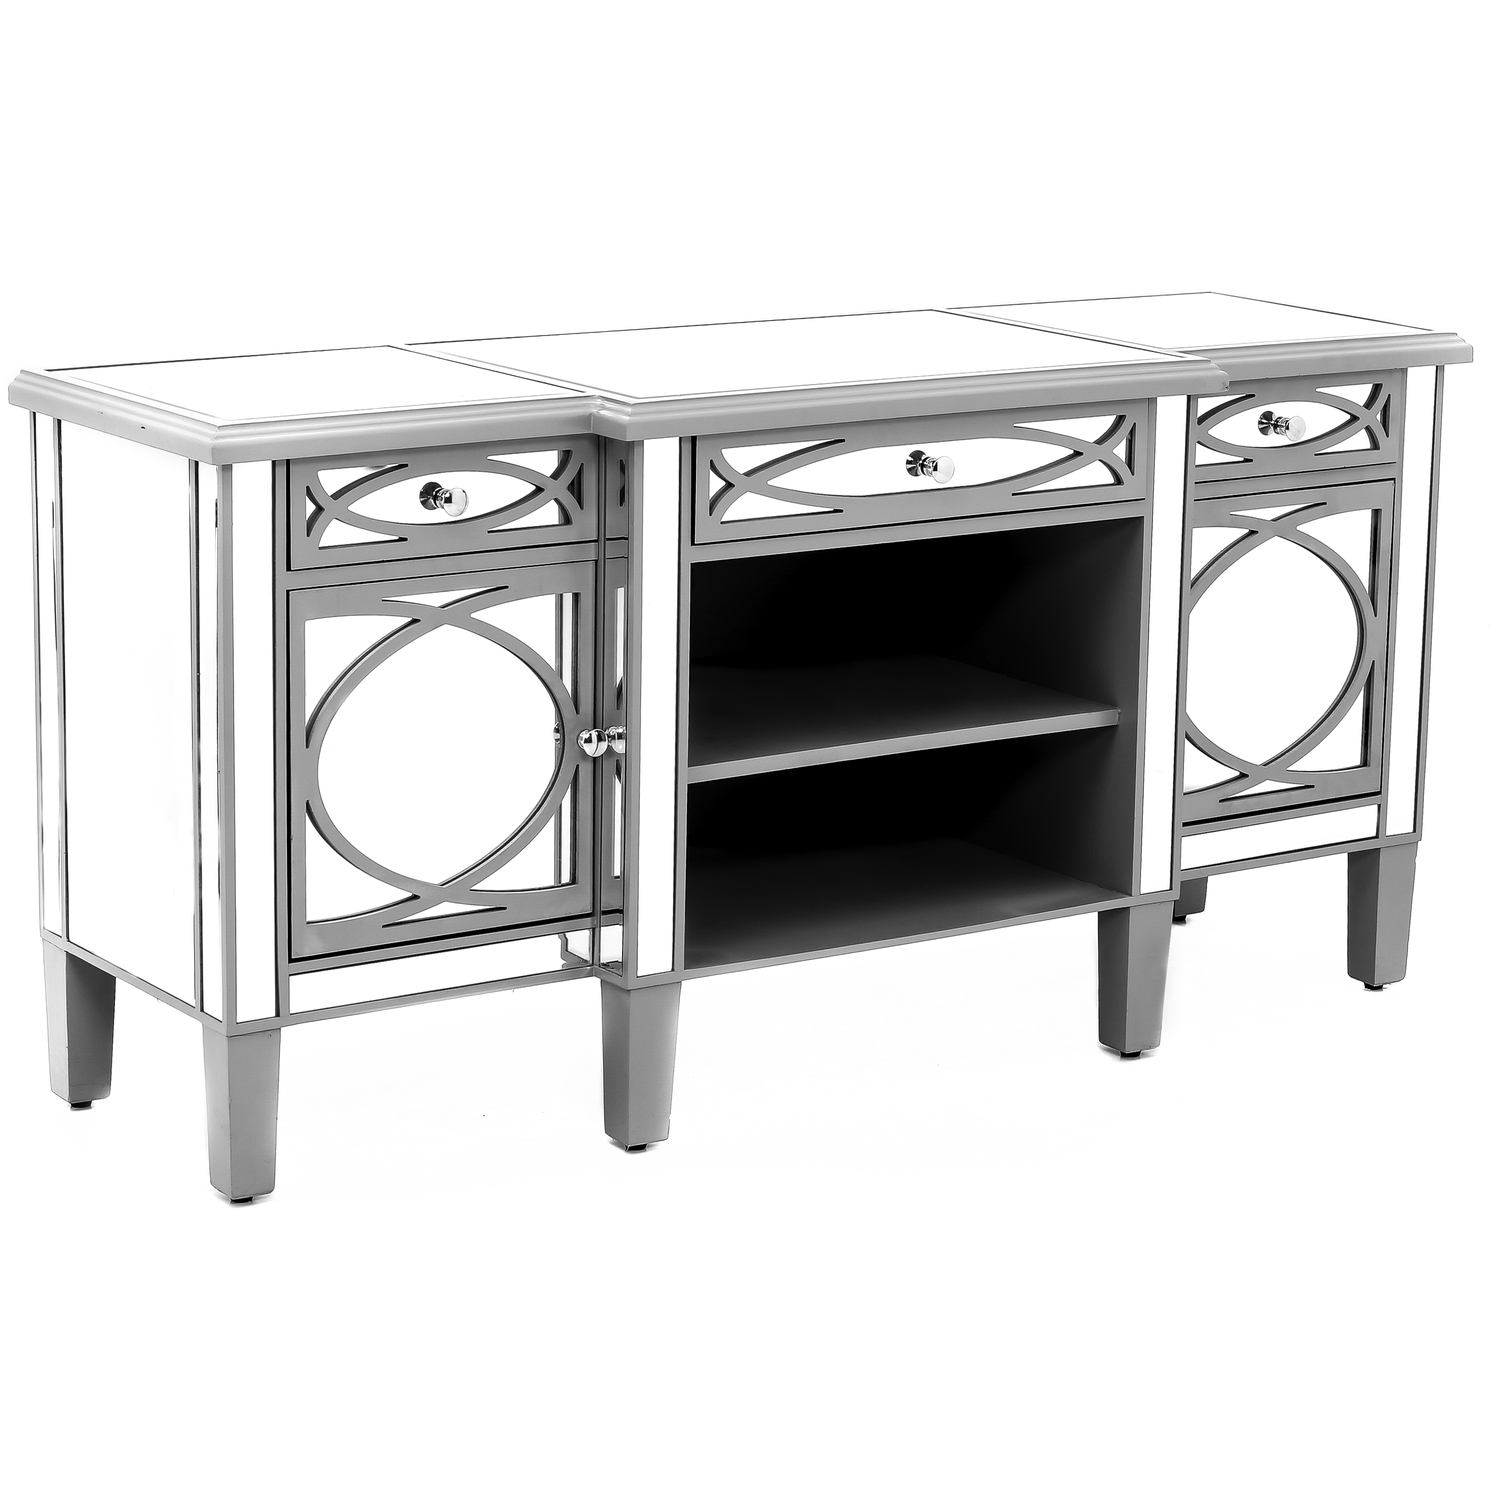 Paloma Collection Mirrored Media Unit - Image 1